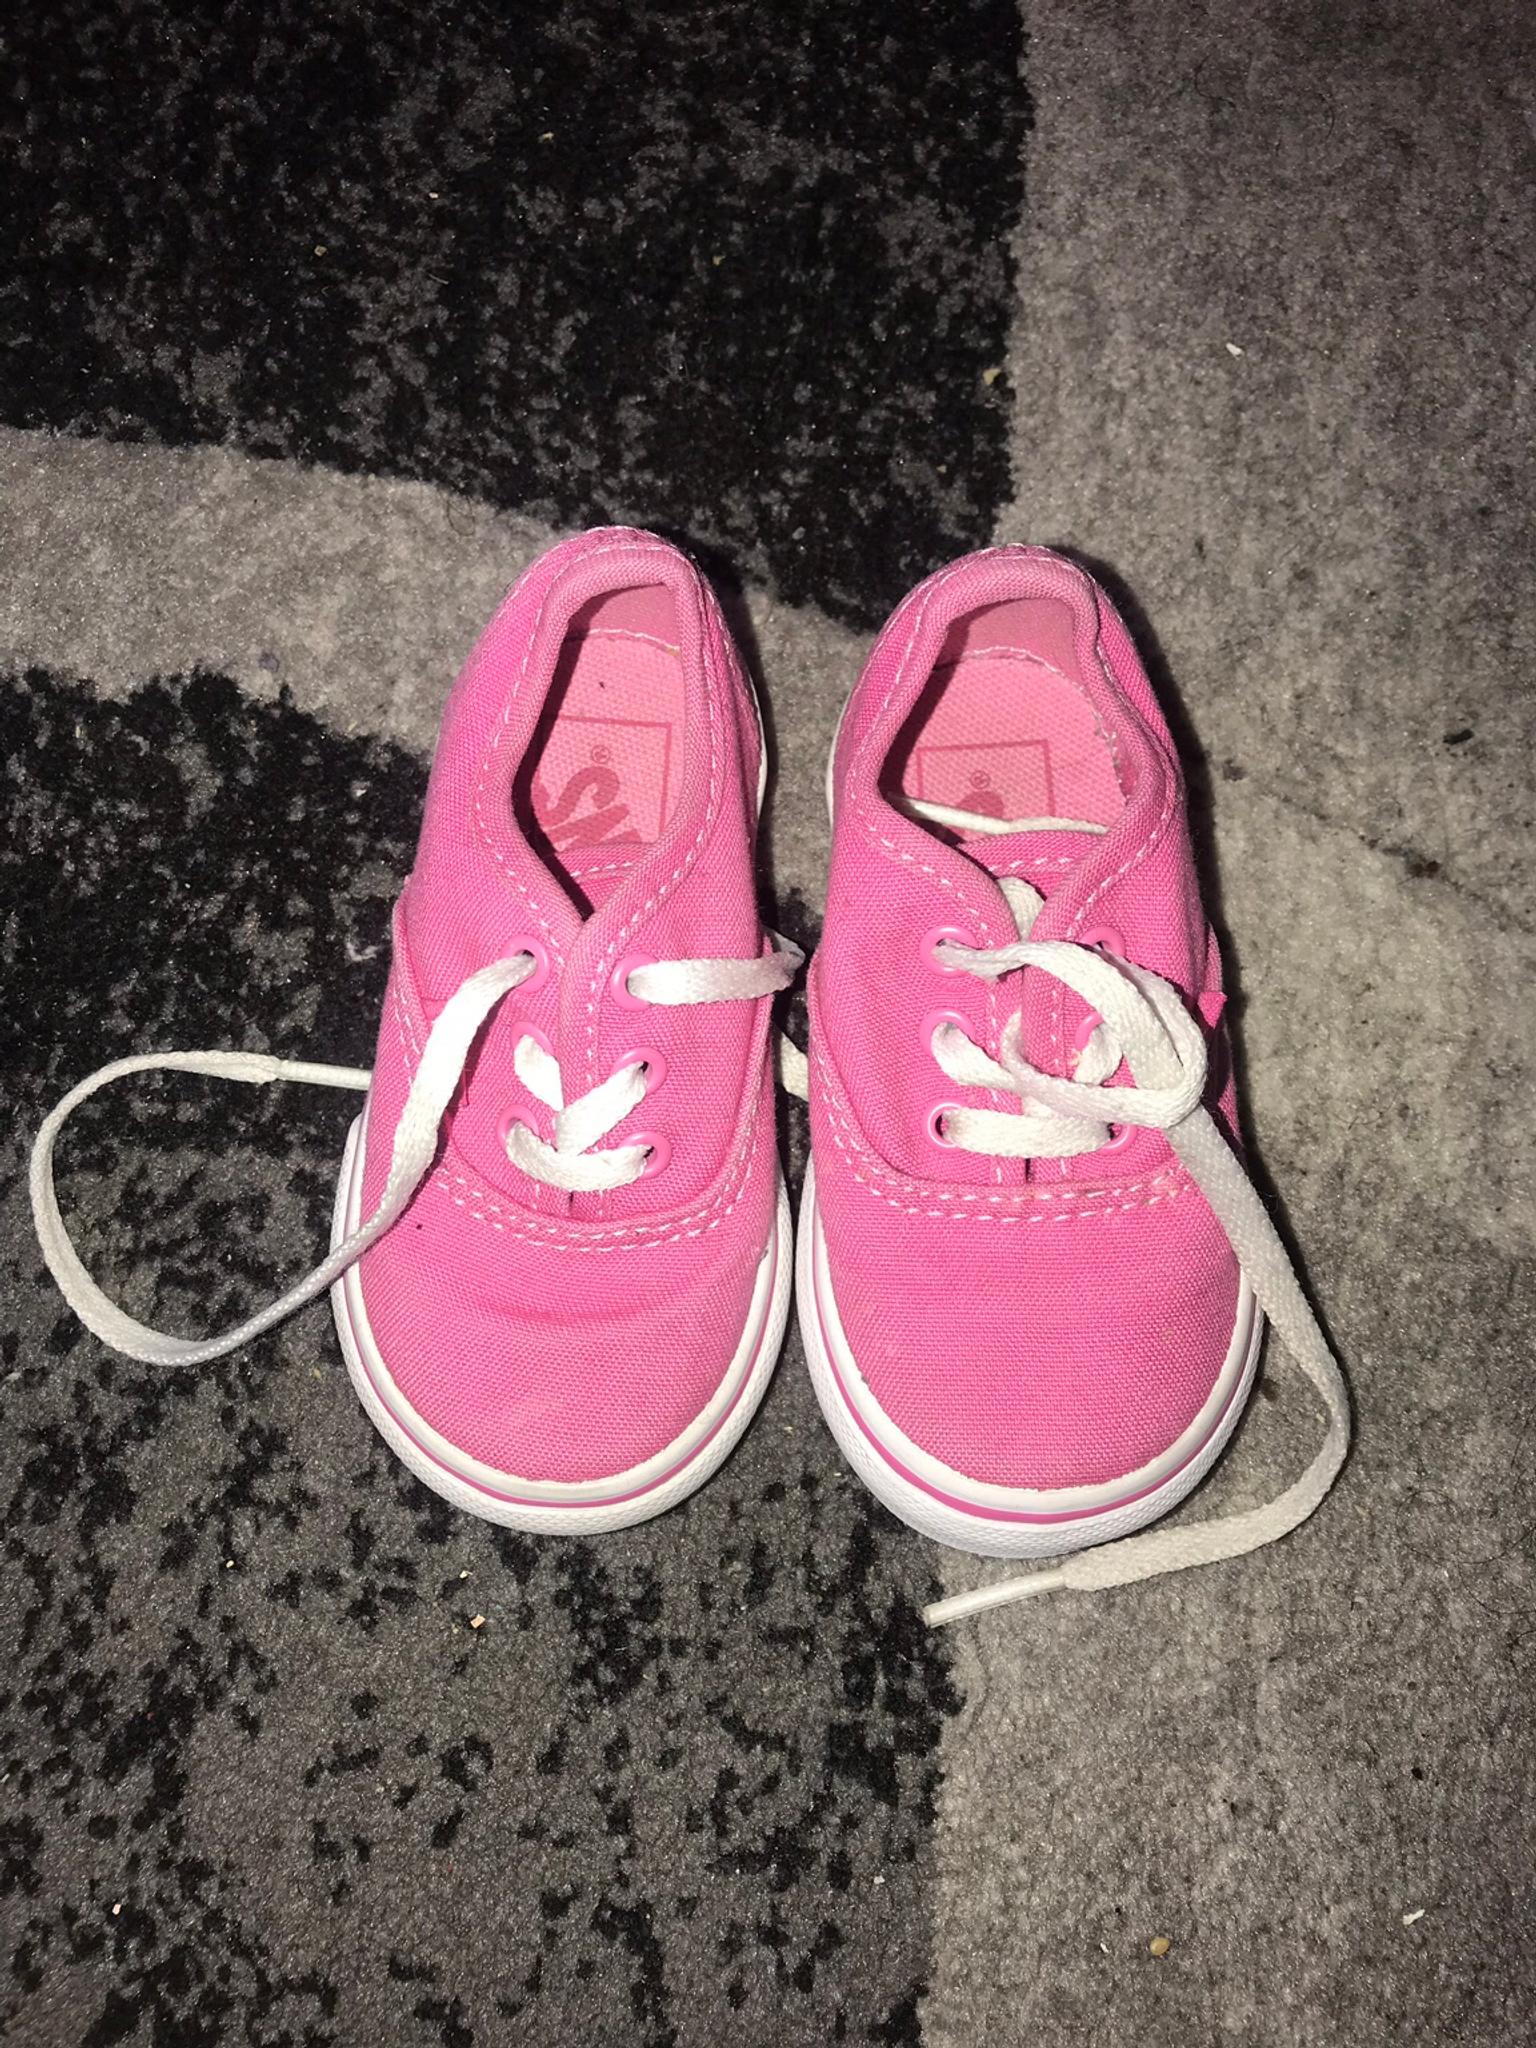 how to clean colorful vans